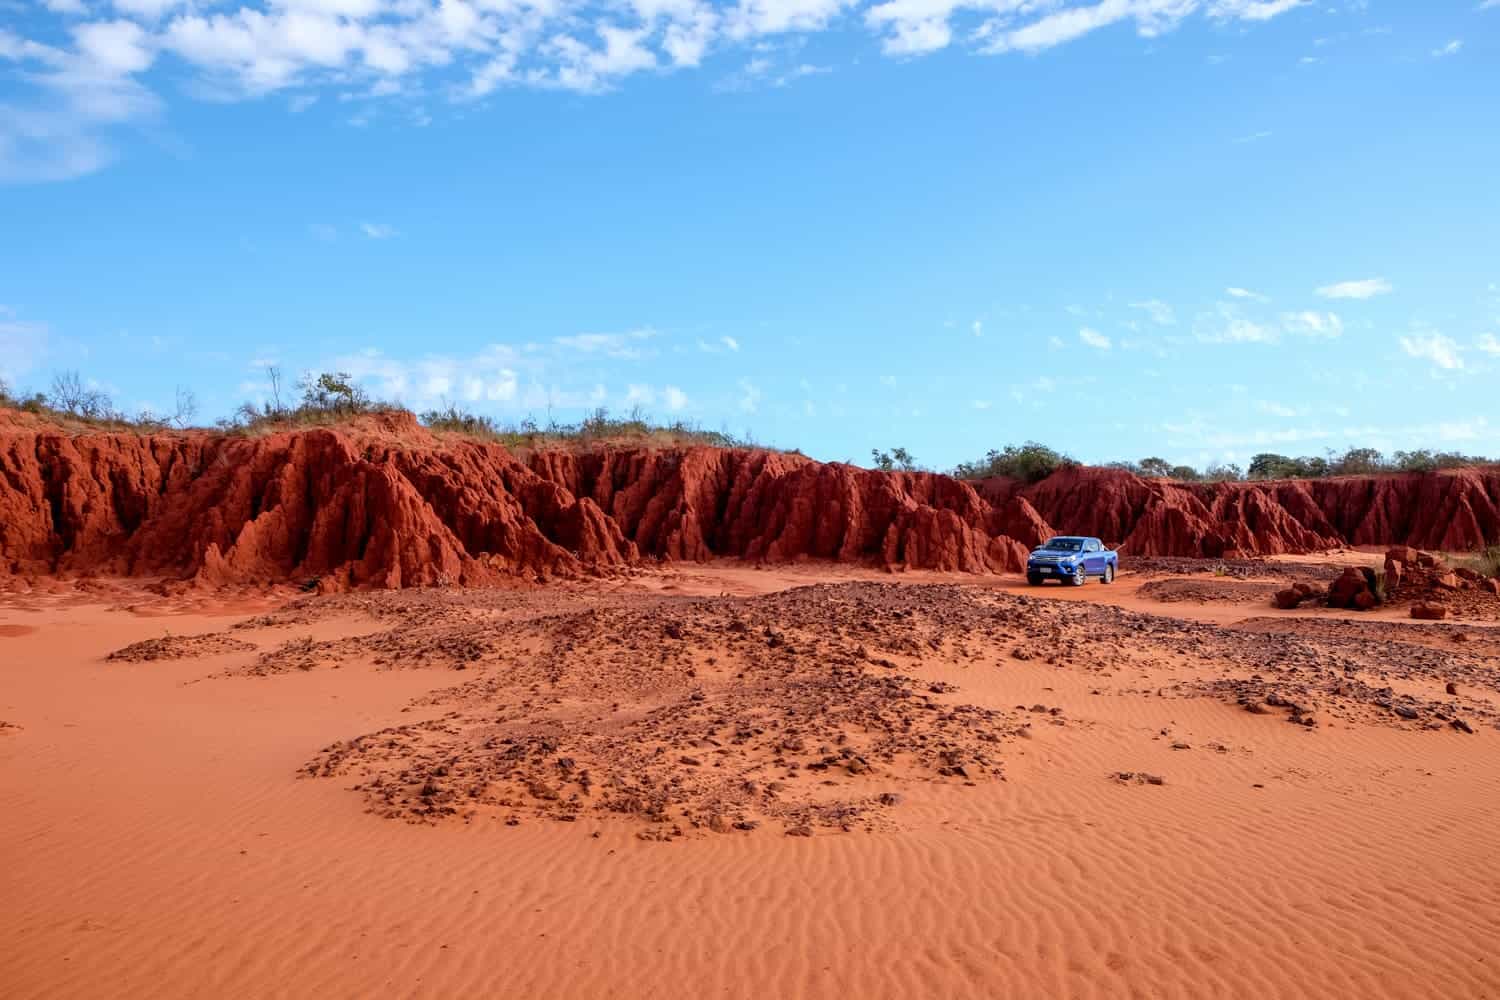 Red ochre sands of Riddle Beach in Broome, Western Australia